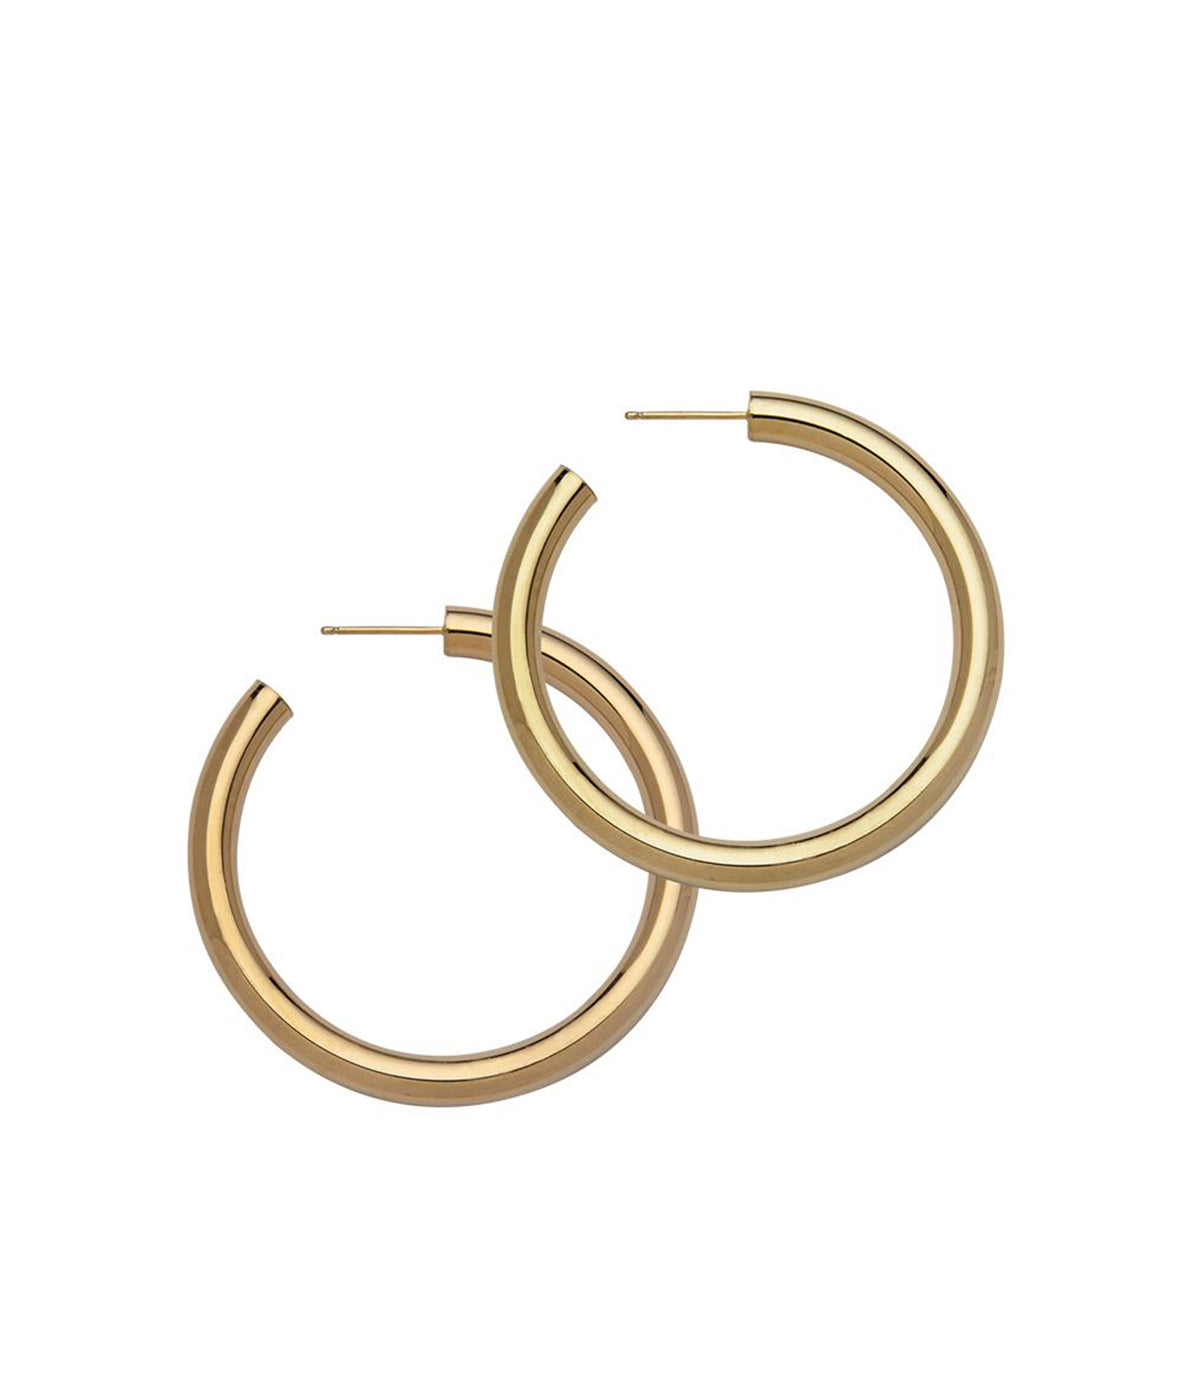 Lou 2 Hoops in 14K Yellow Gold Plated Silver